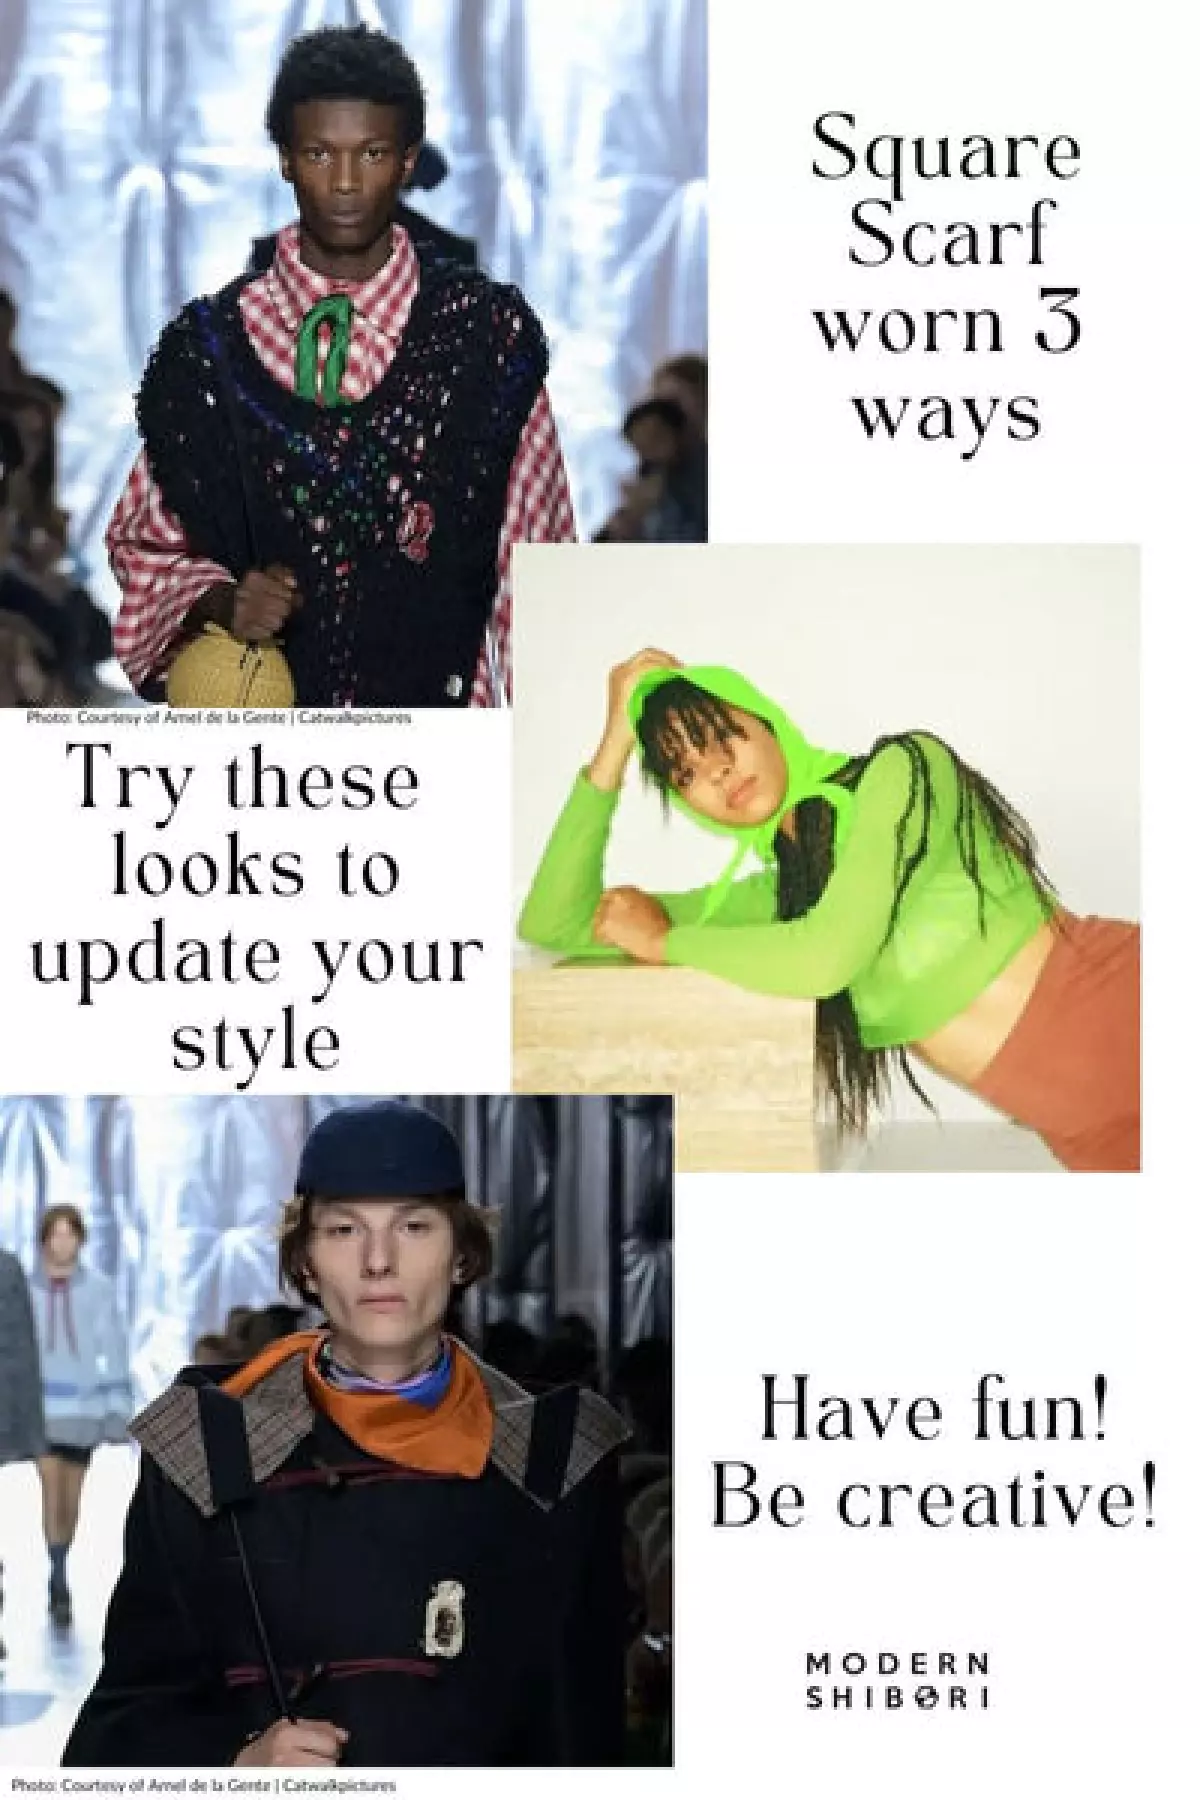 See 3 ways to wear a square scarf.